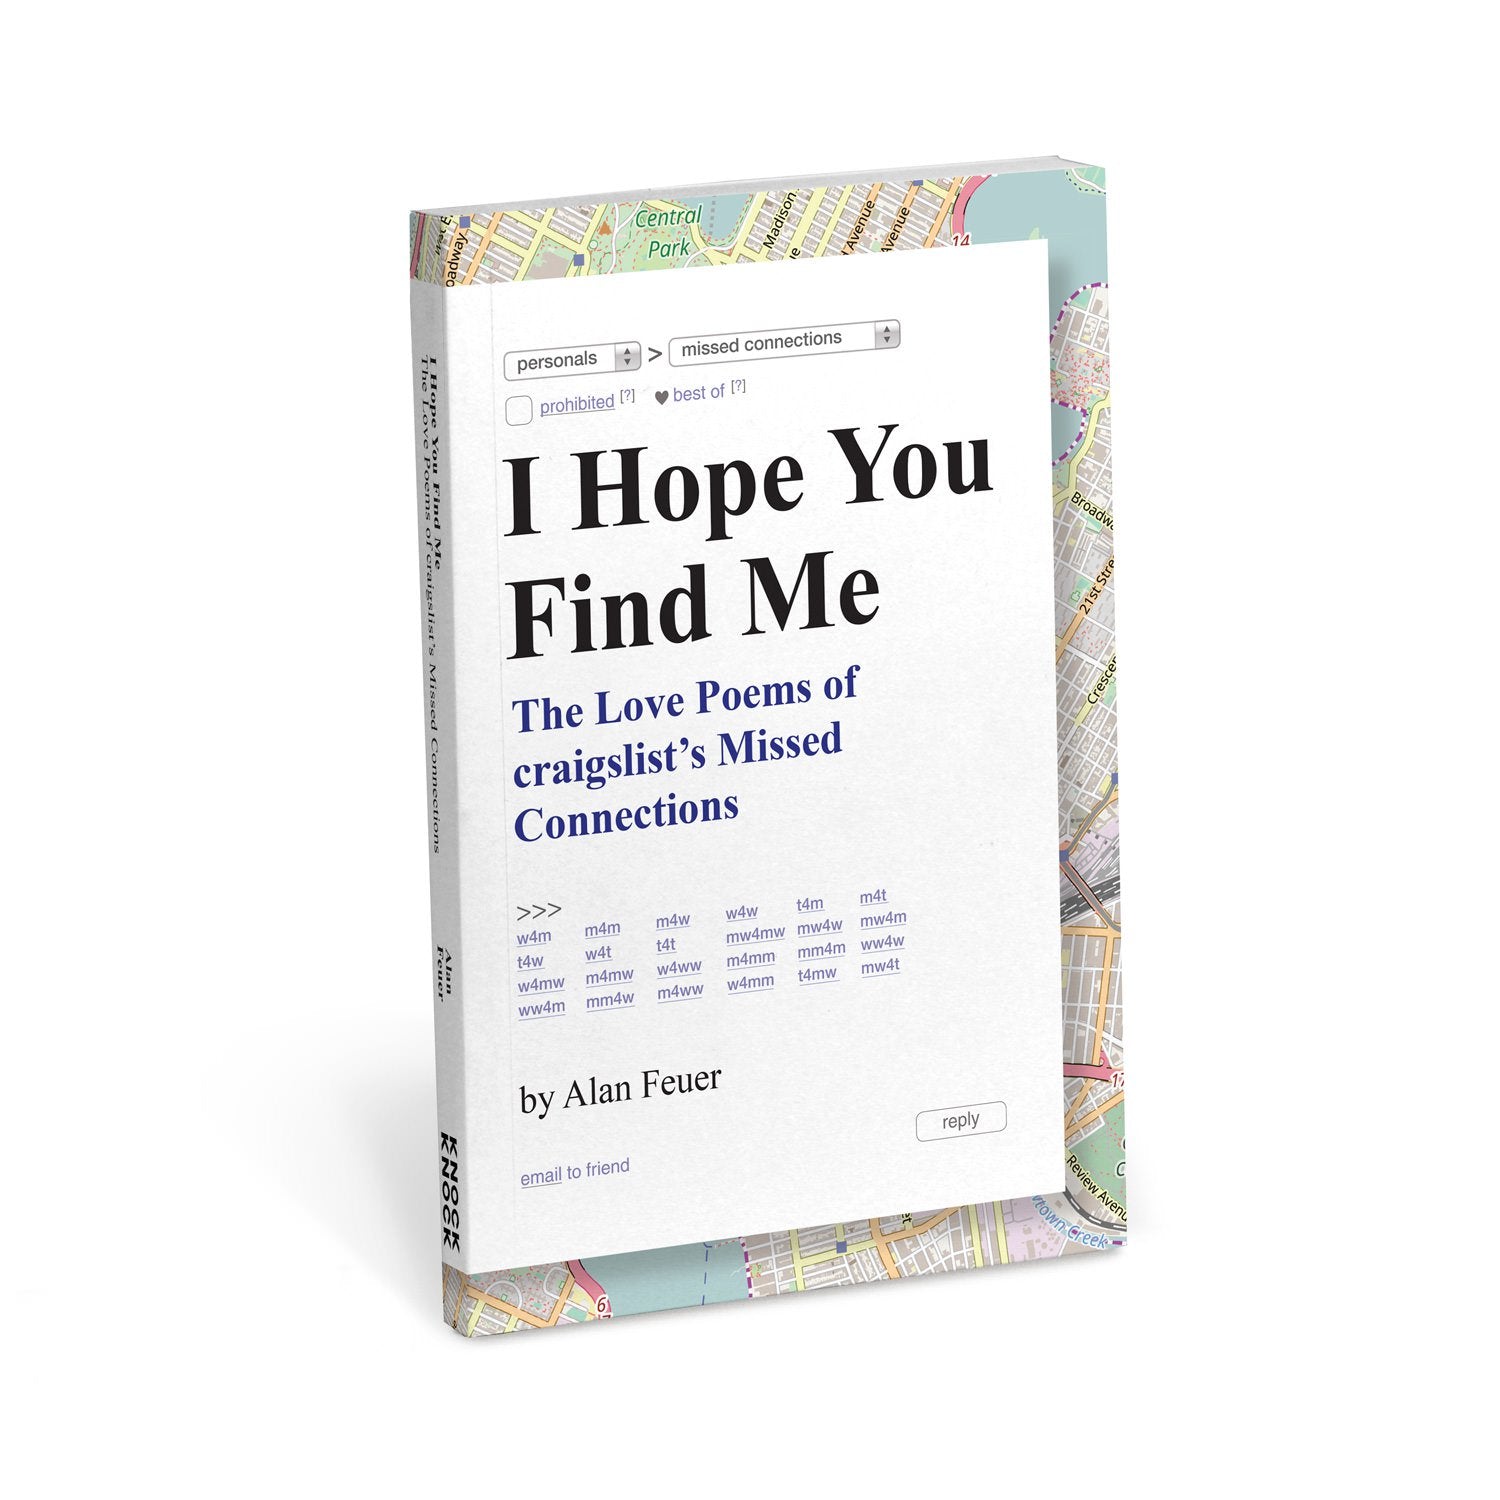 I Hope You Find Me: The Love Poems Of Craigslist’s Missed Connections